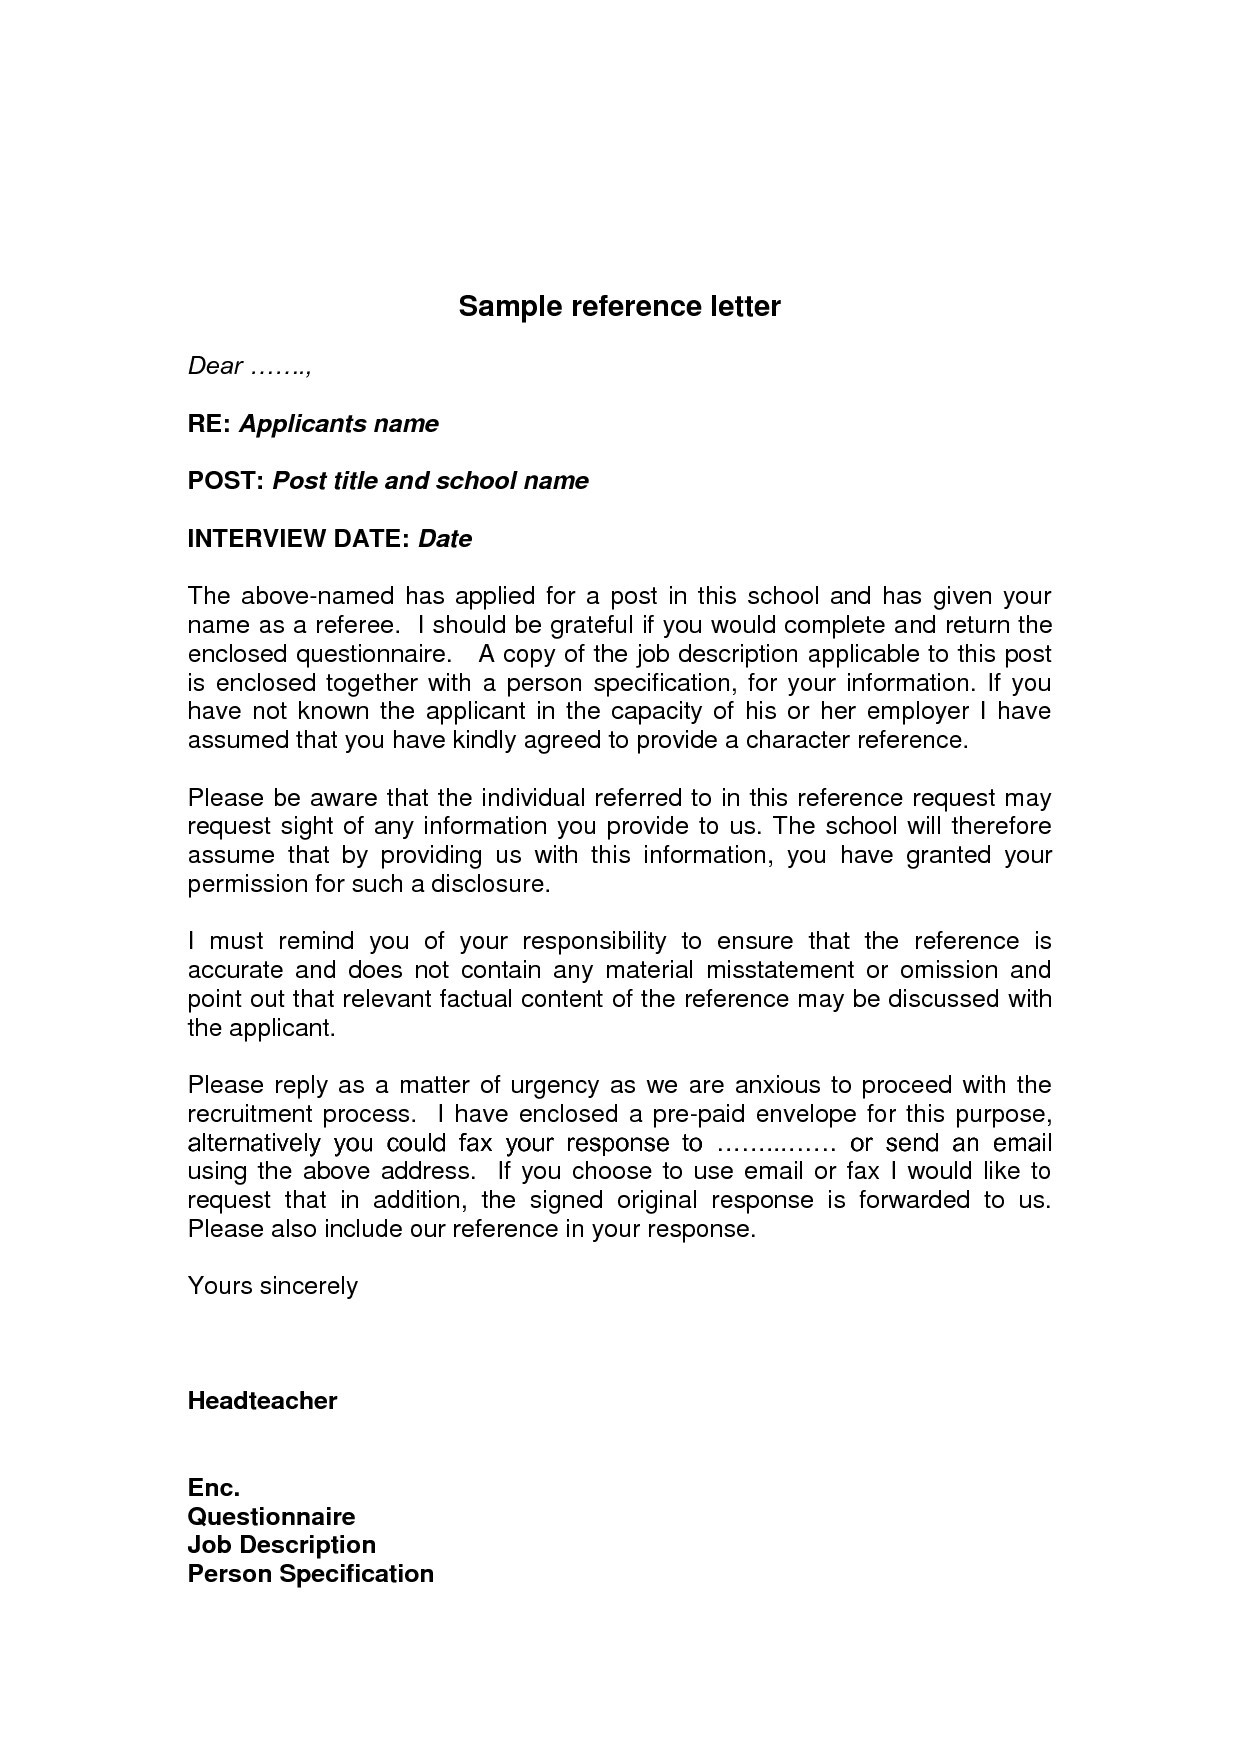 Company Business Reference Letter Template - Sample Personalcharacter Reference Letter Created Using Ms Word